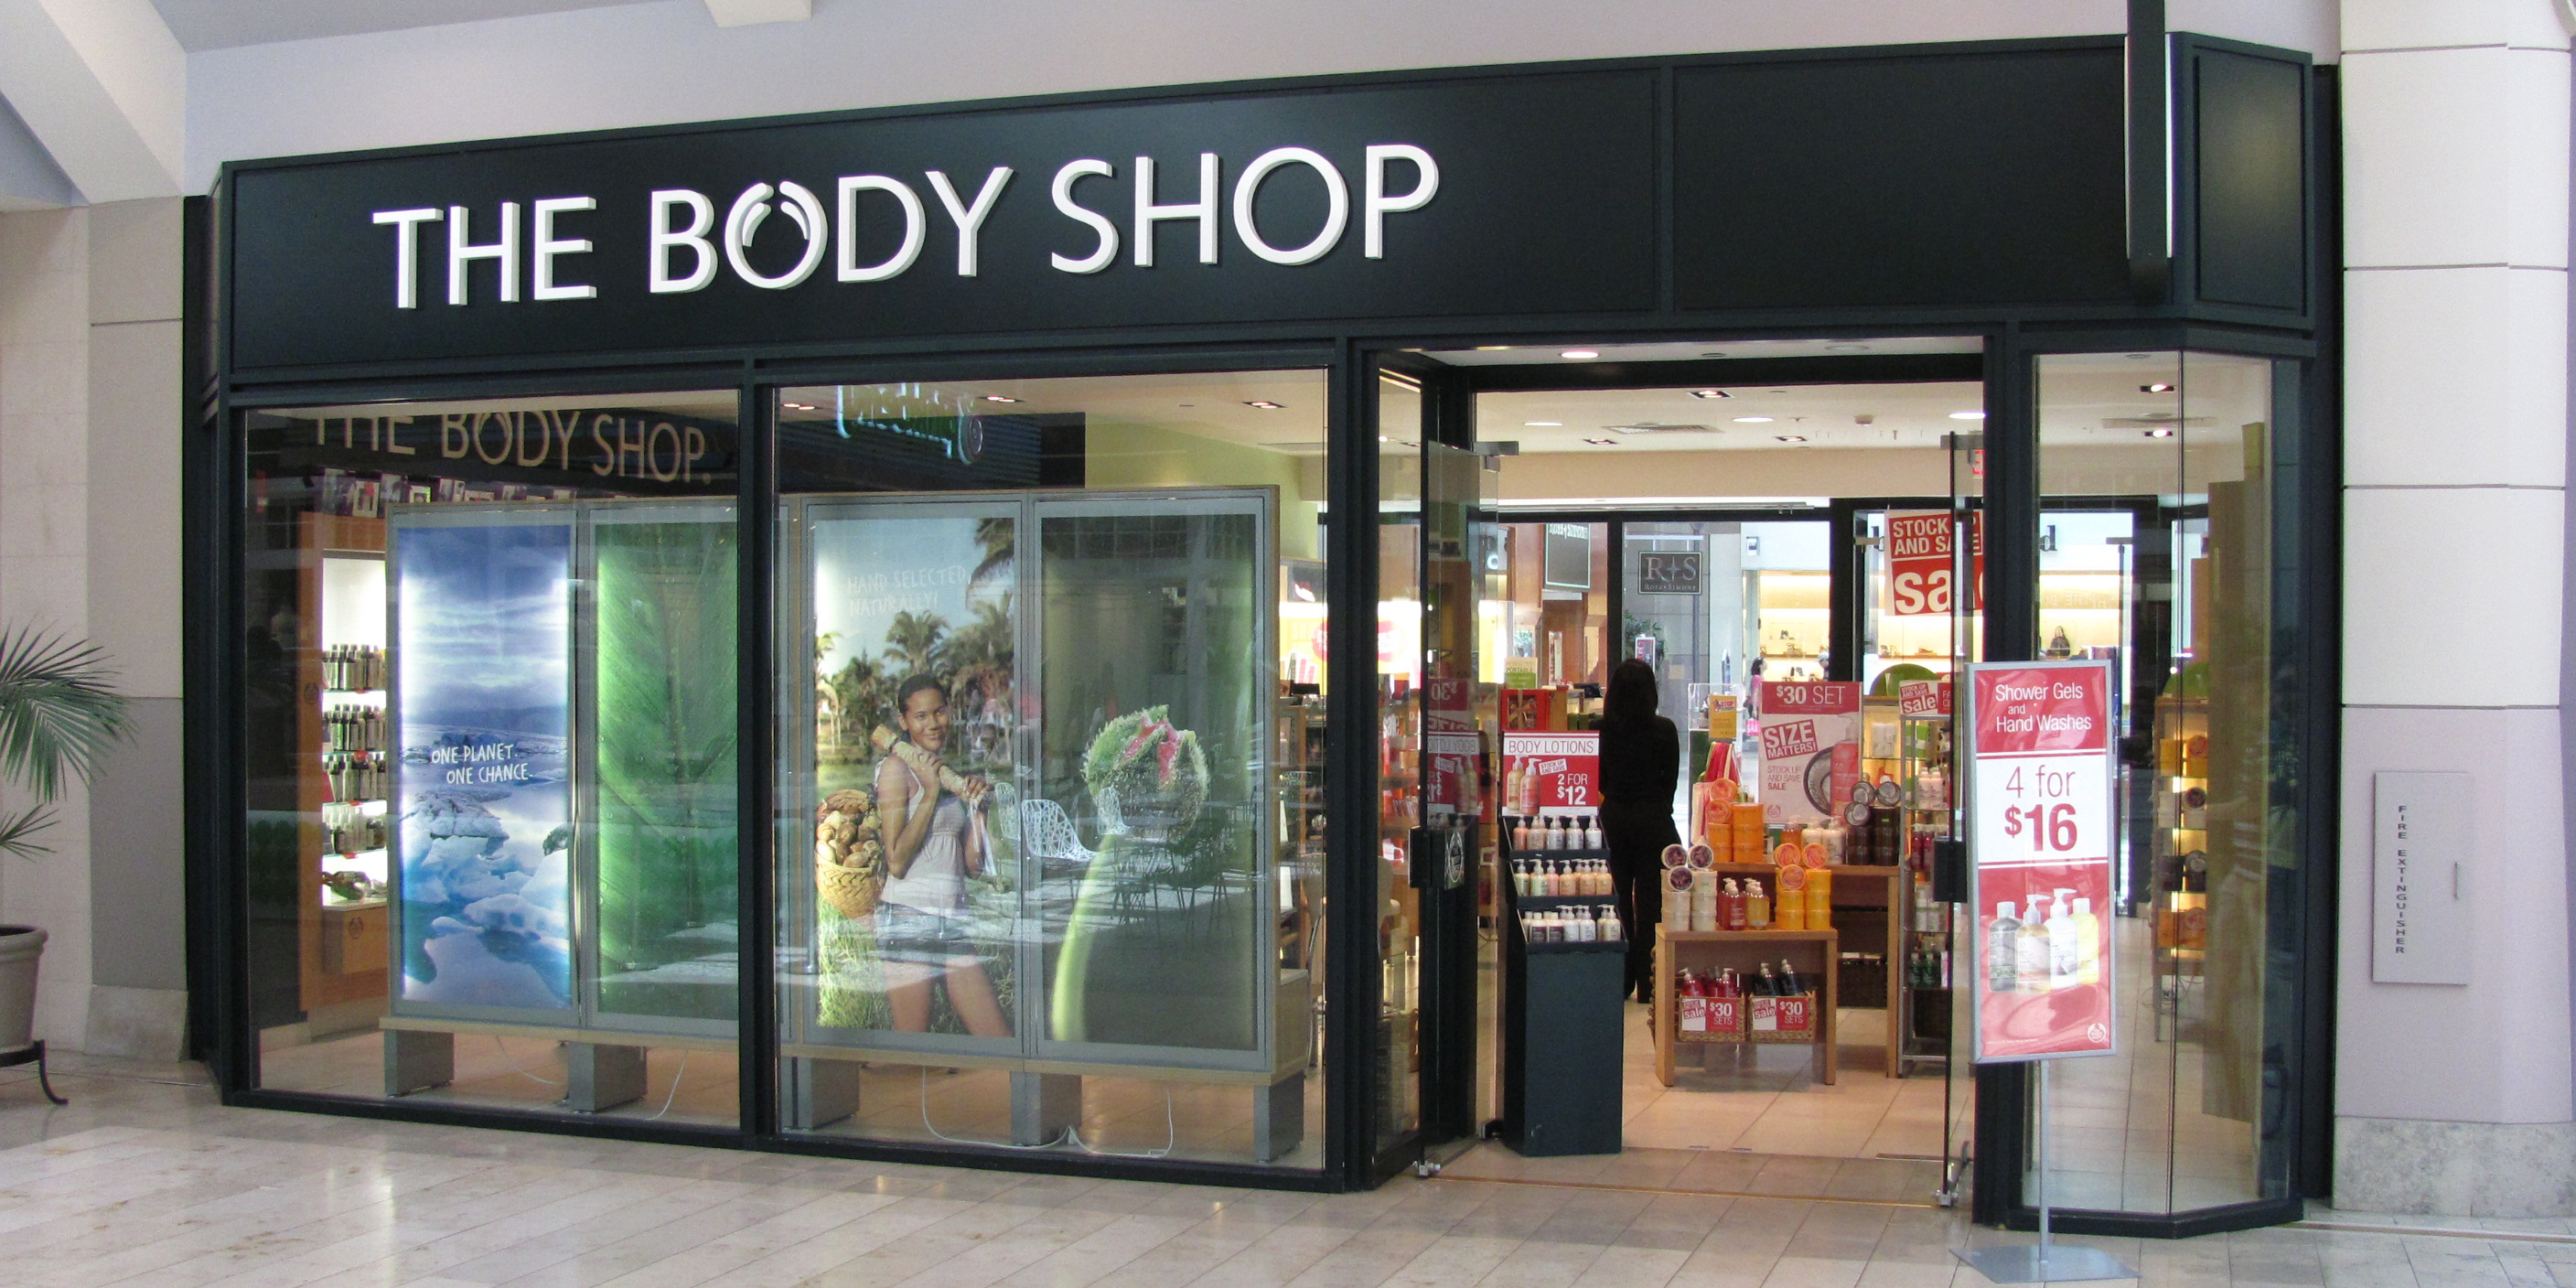 the Body shop